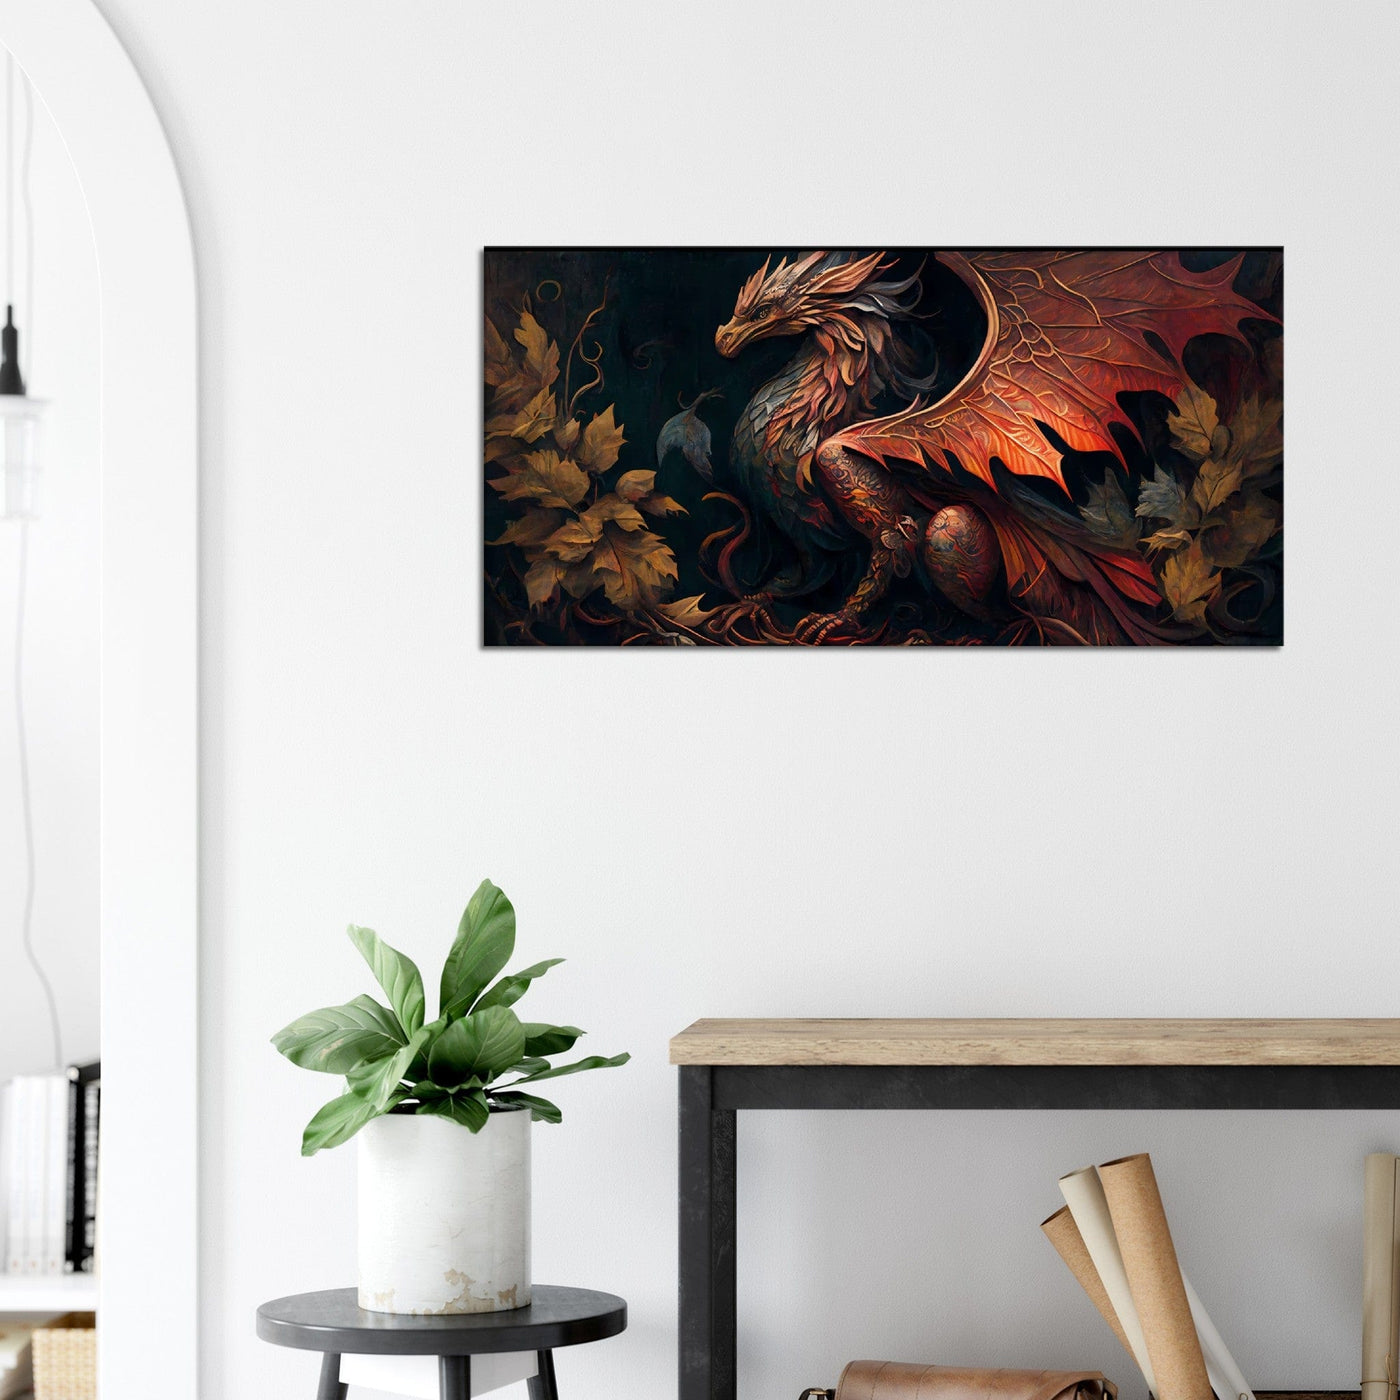 Krakow's Ancient Guardian - Oil Painting Printed Canvas. 50X100.